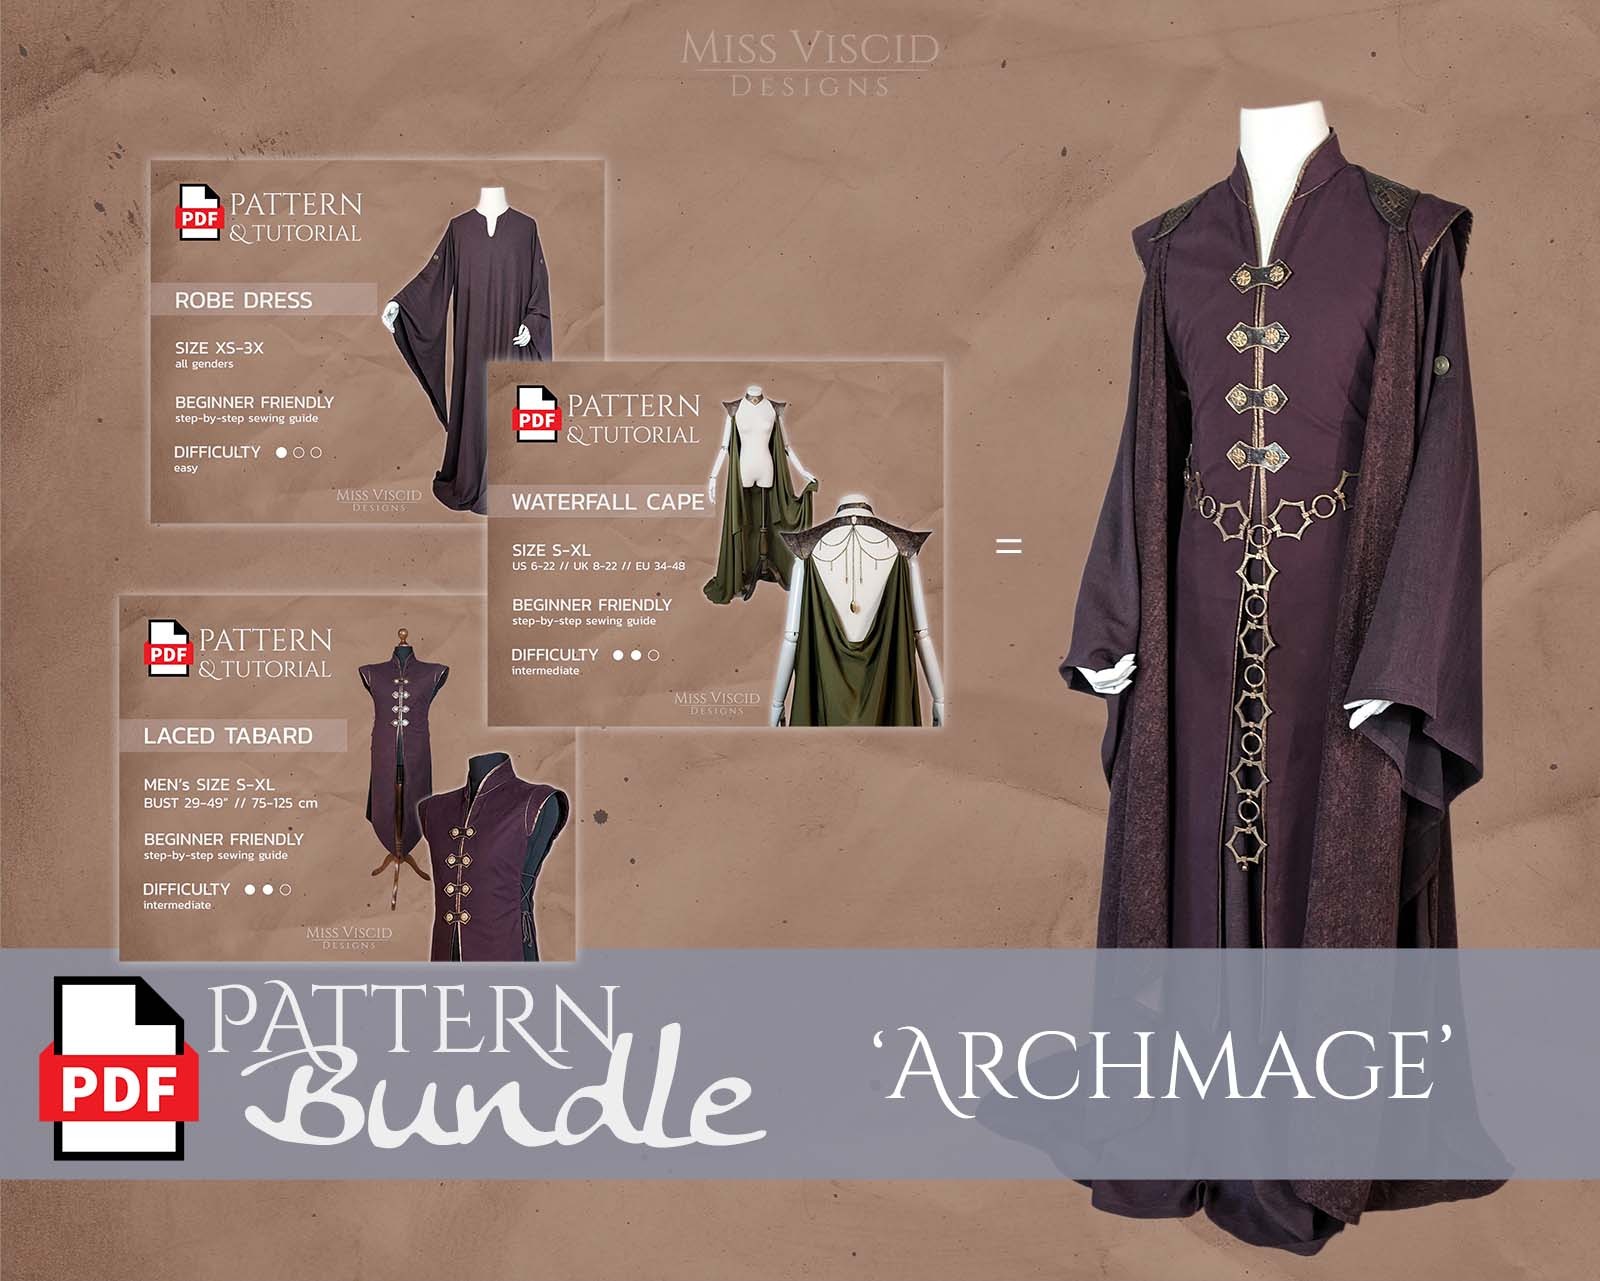 Mens PDF pattern bundle Archmage - 3 download patterns with sewing guides 3